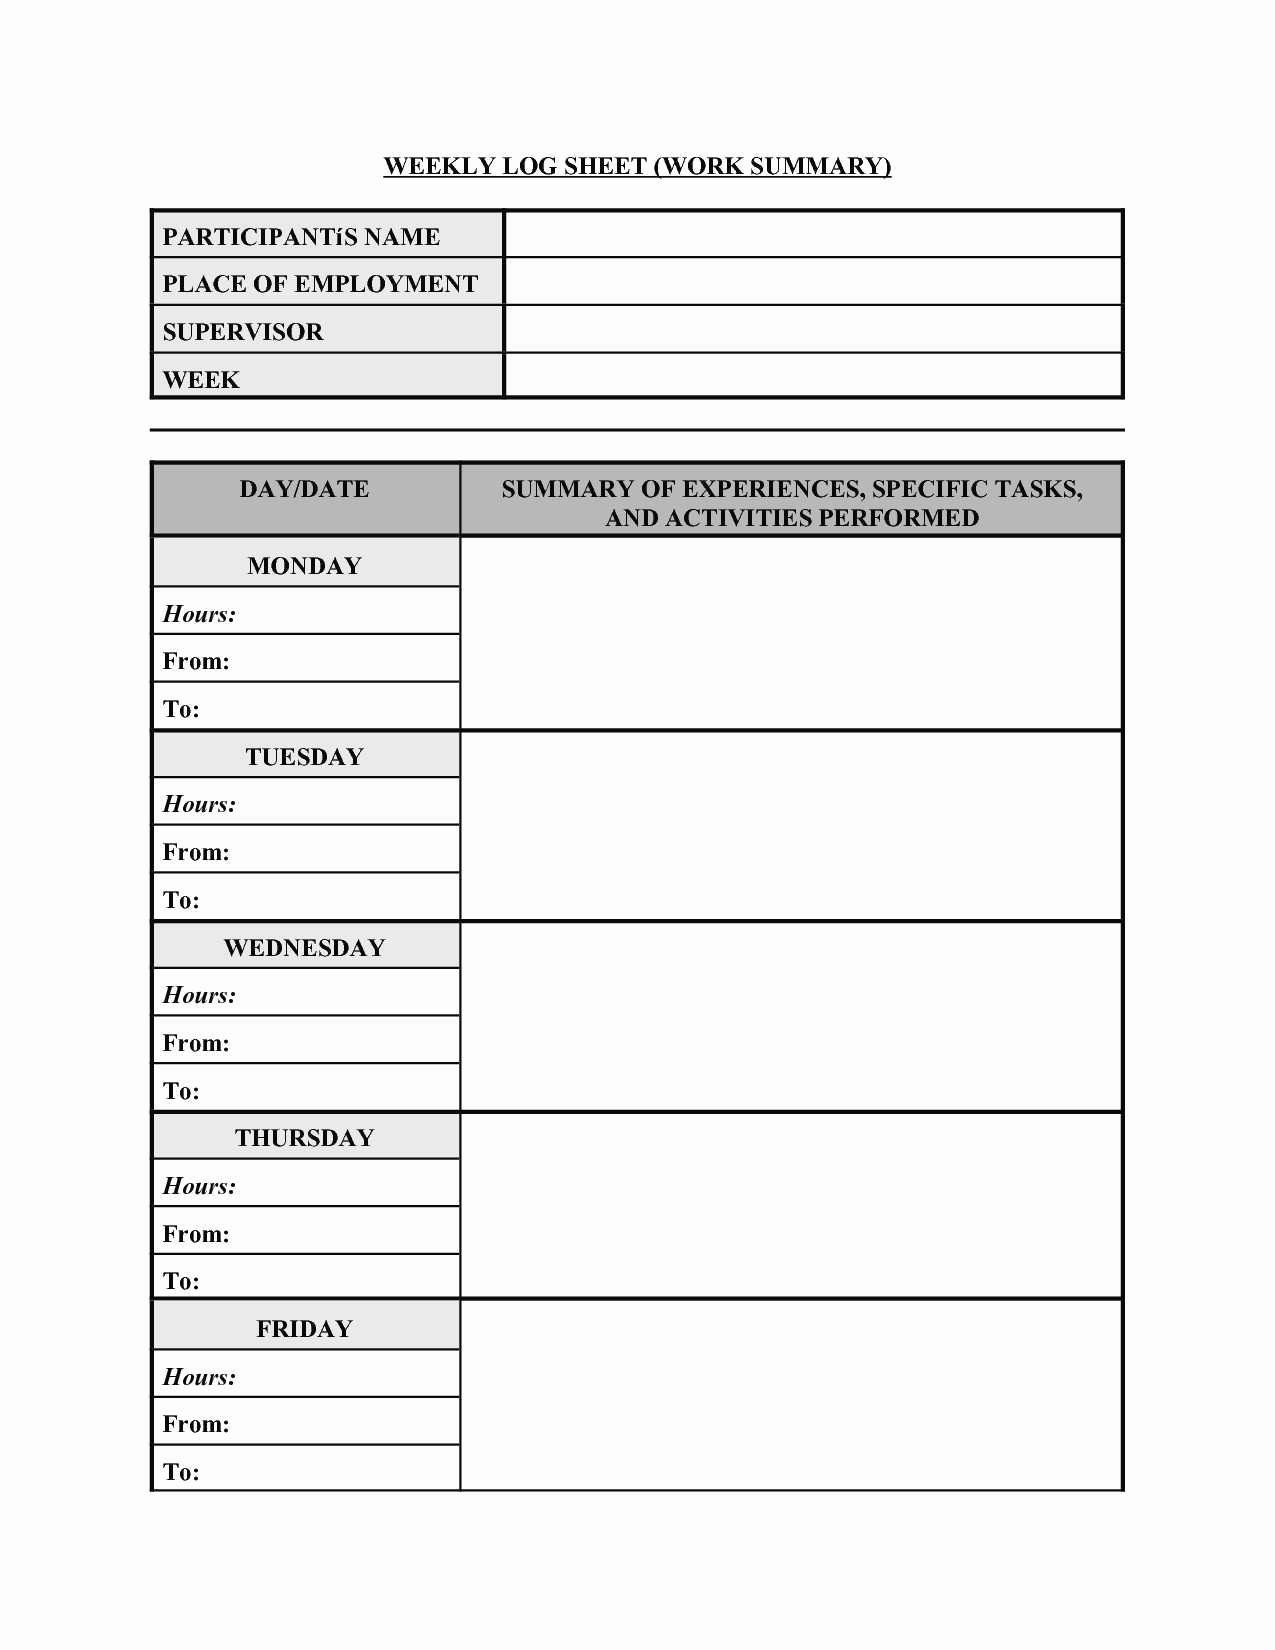 Employee Shift Scheduling Template Awesome Employee Shift Schedule Excel Template Download Elegant